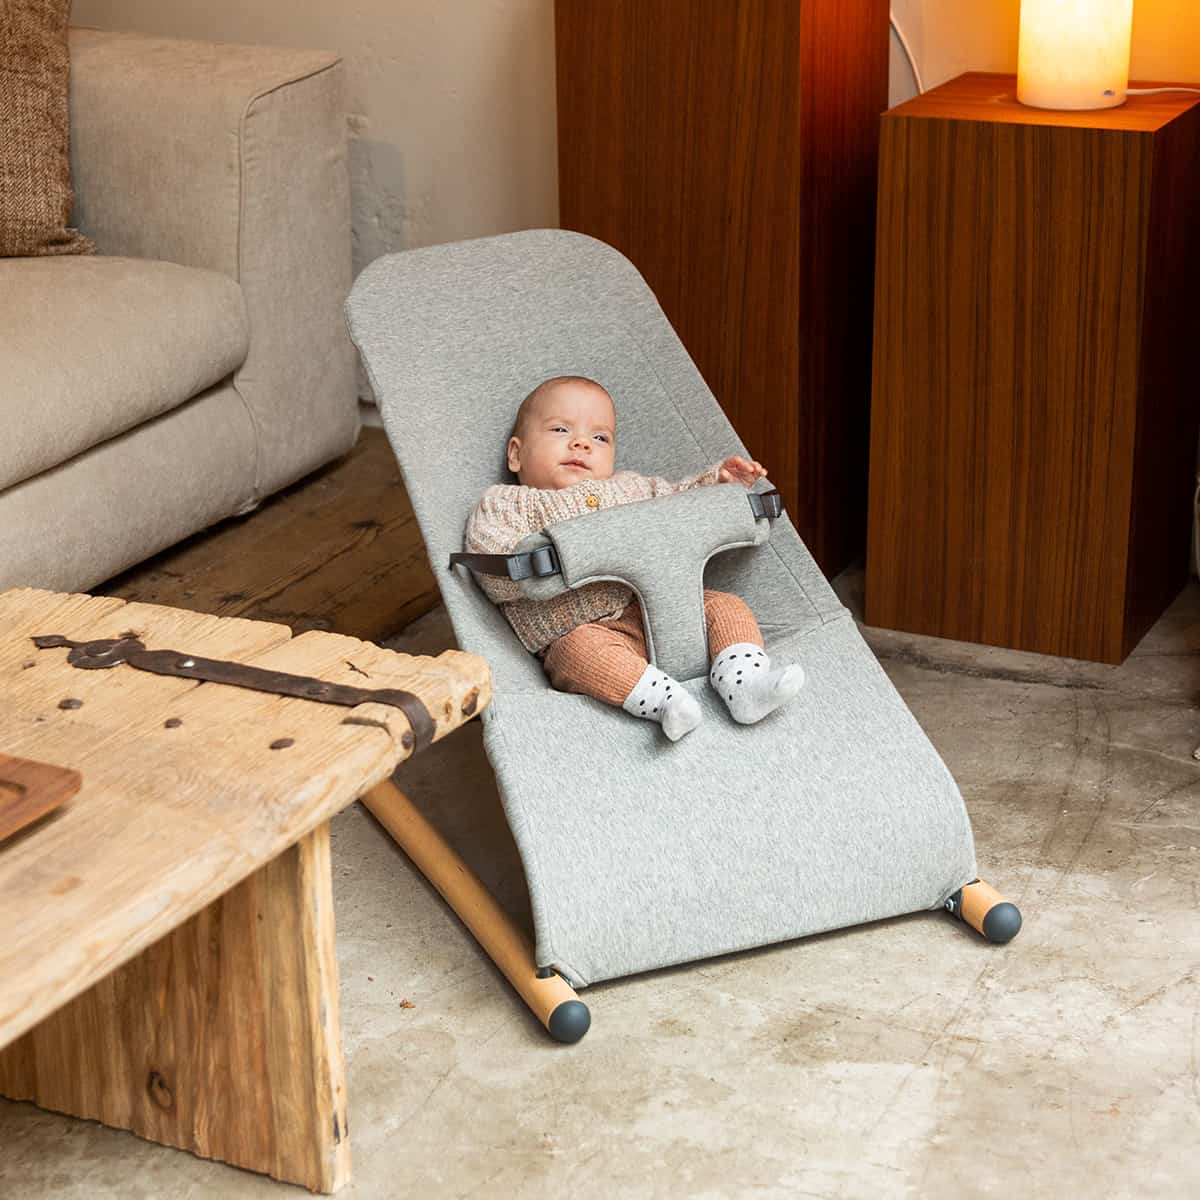 Childhome Bouncer Jersey Grey in Living Room With Baby